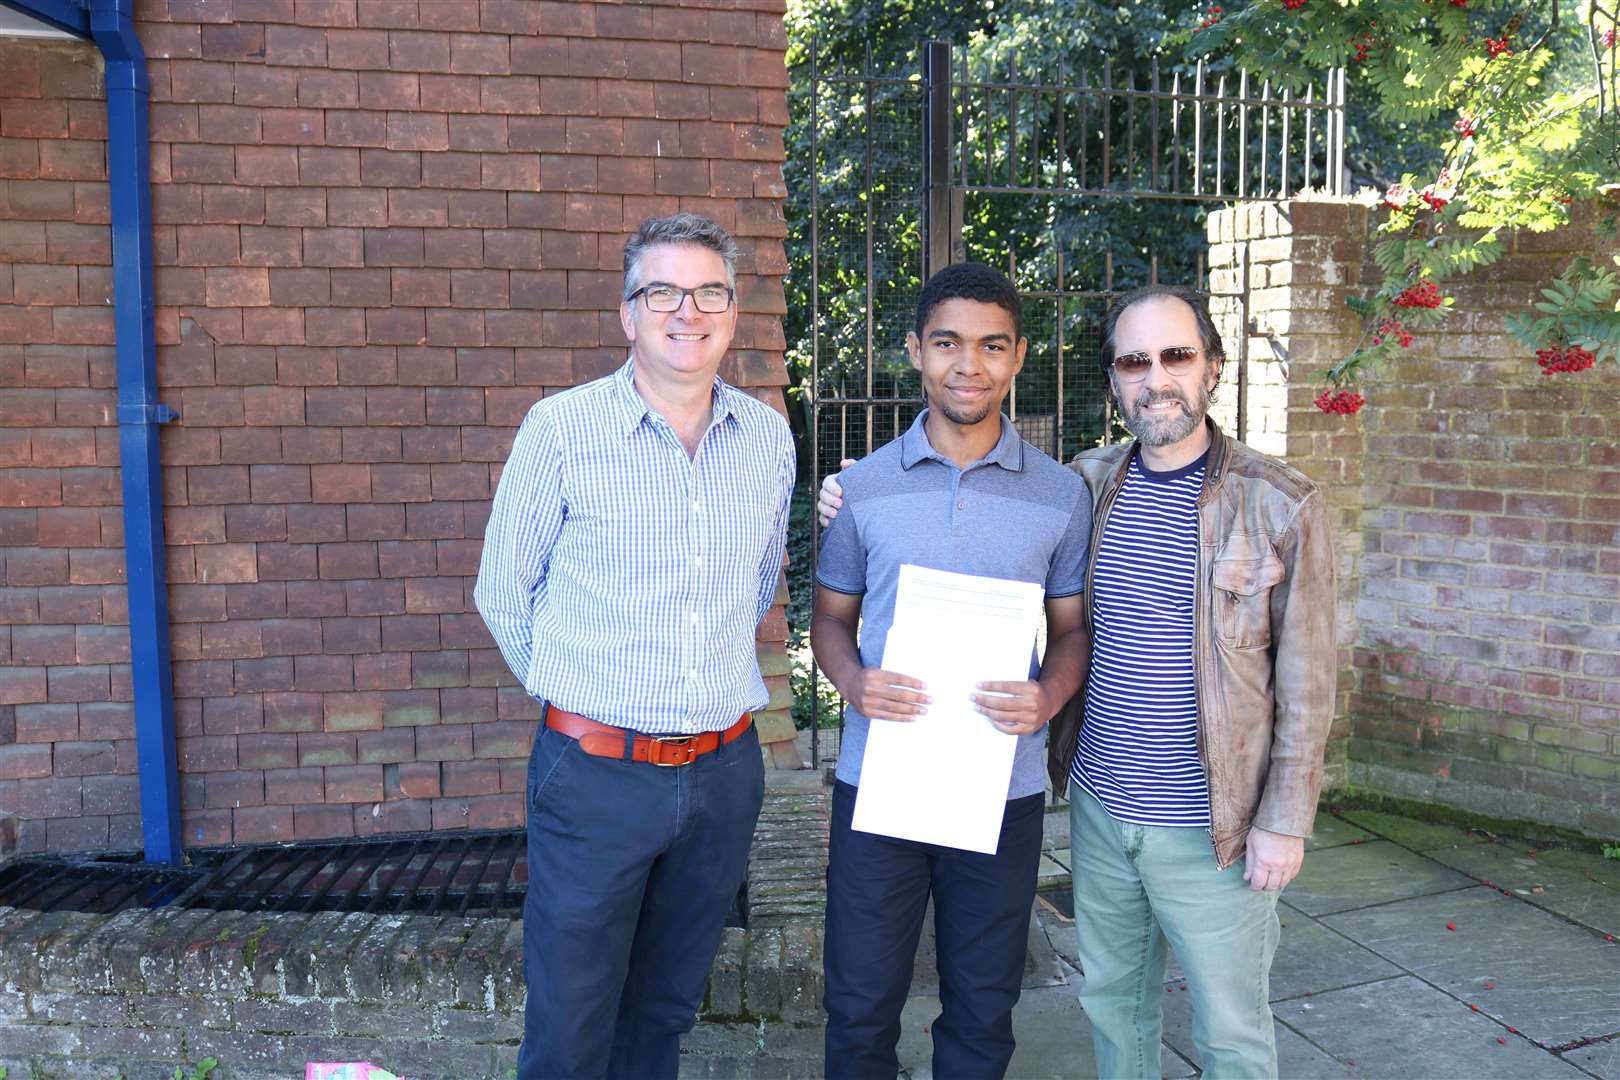 King's School pupil Adam Snelling with his dad and and principal Ben Charles